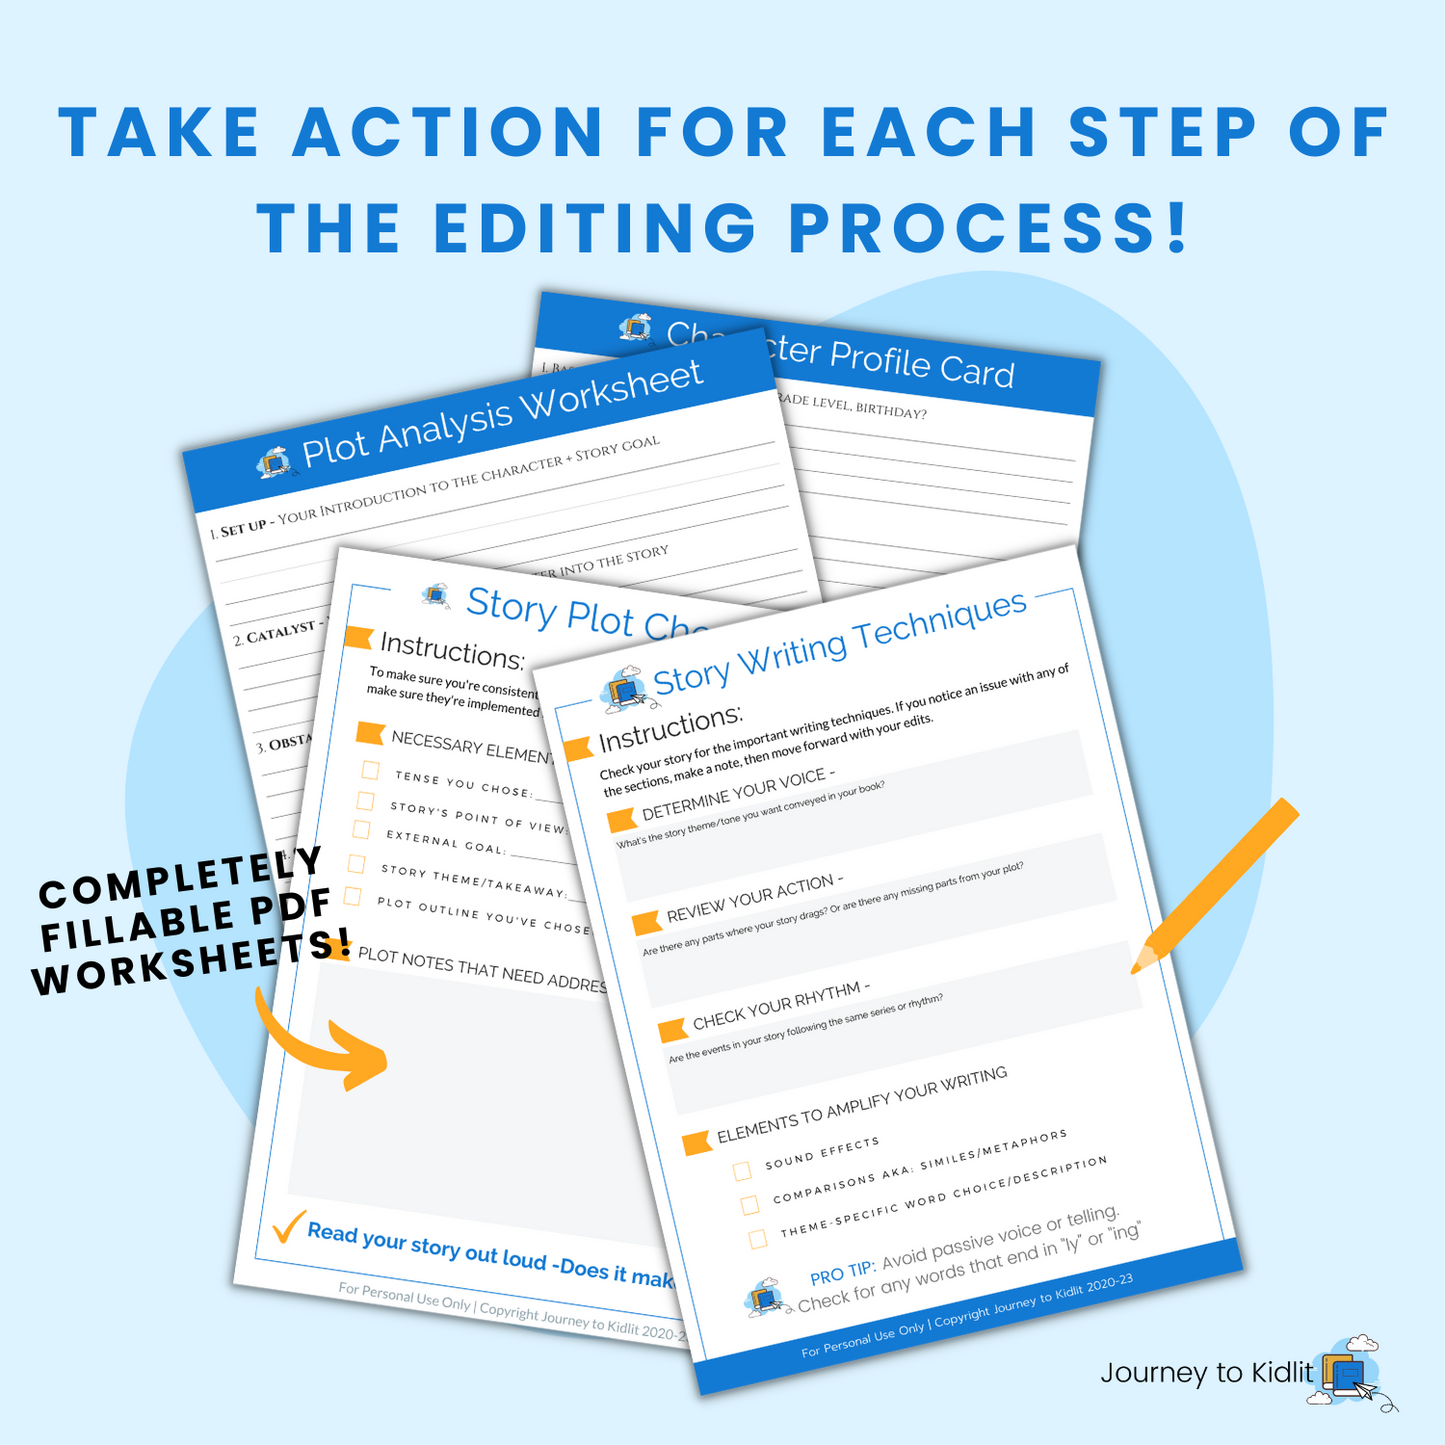 Kidlit Editing Workbook | Help to easily edit your children's book